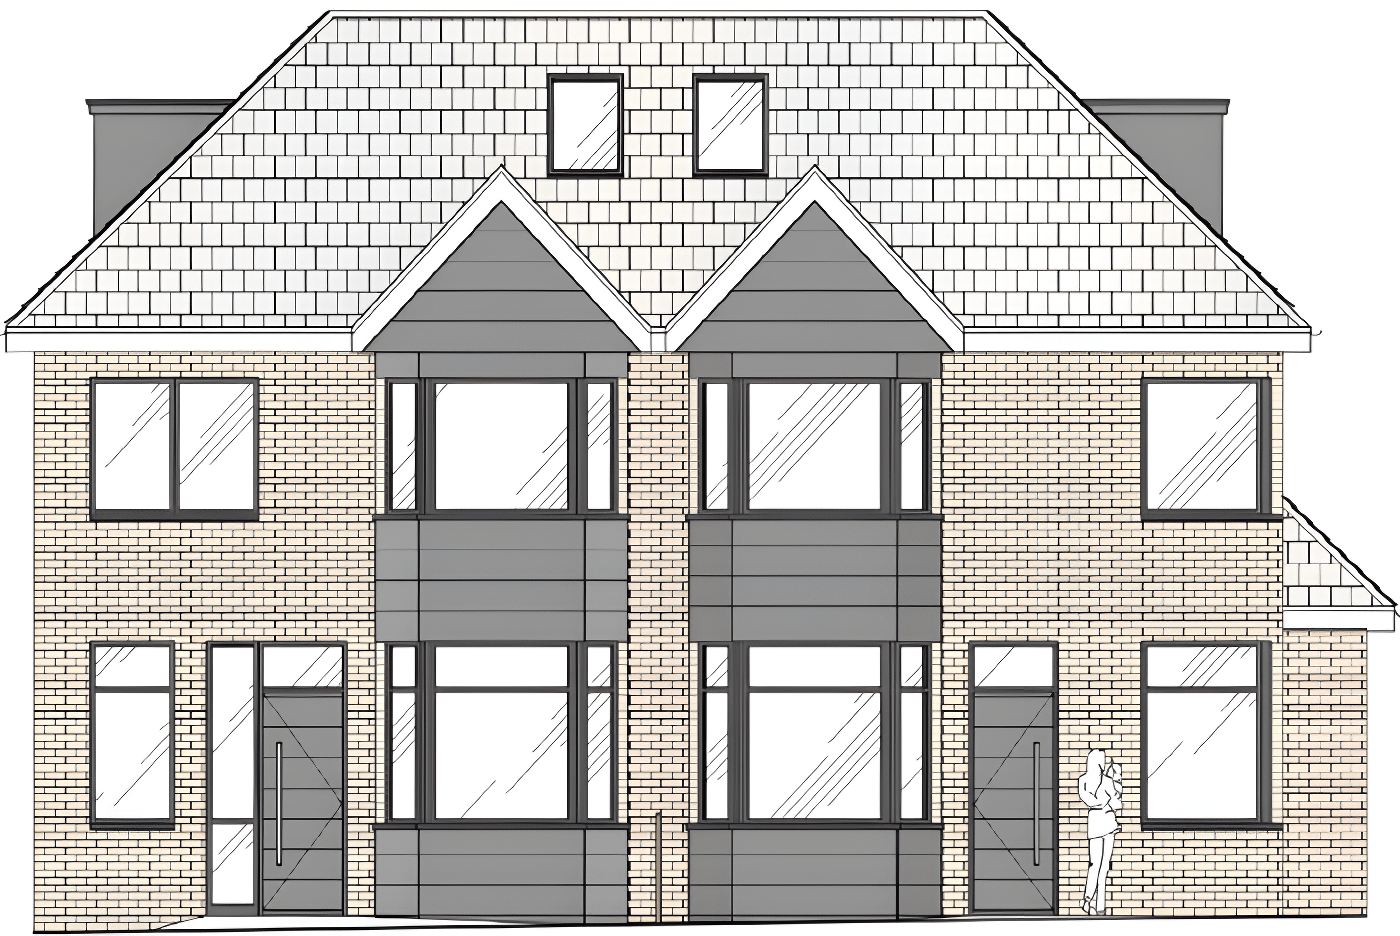 Two New Houses for Totteridge, London